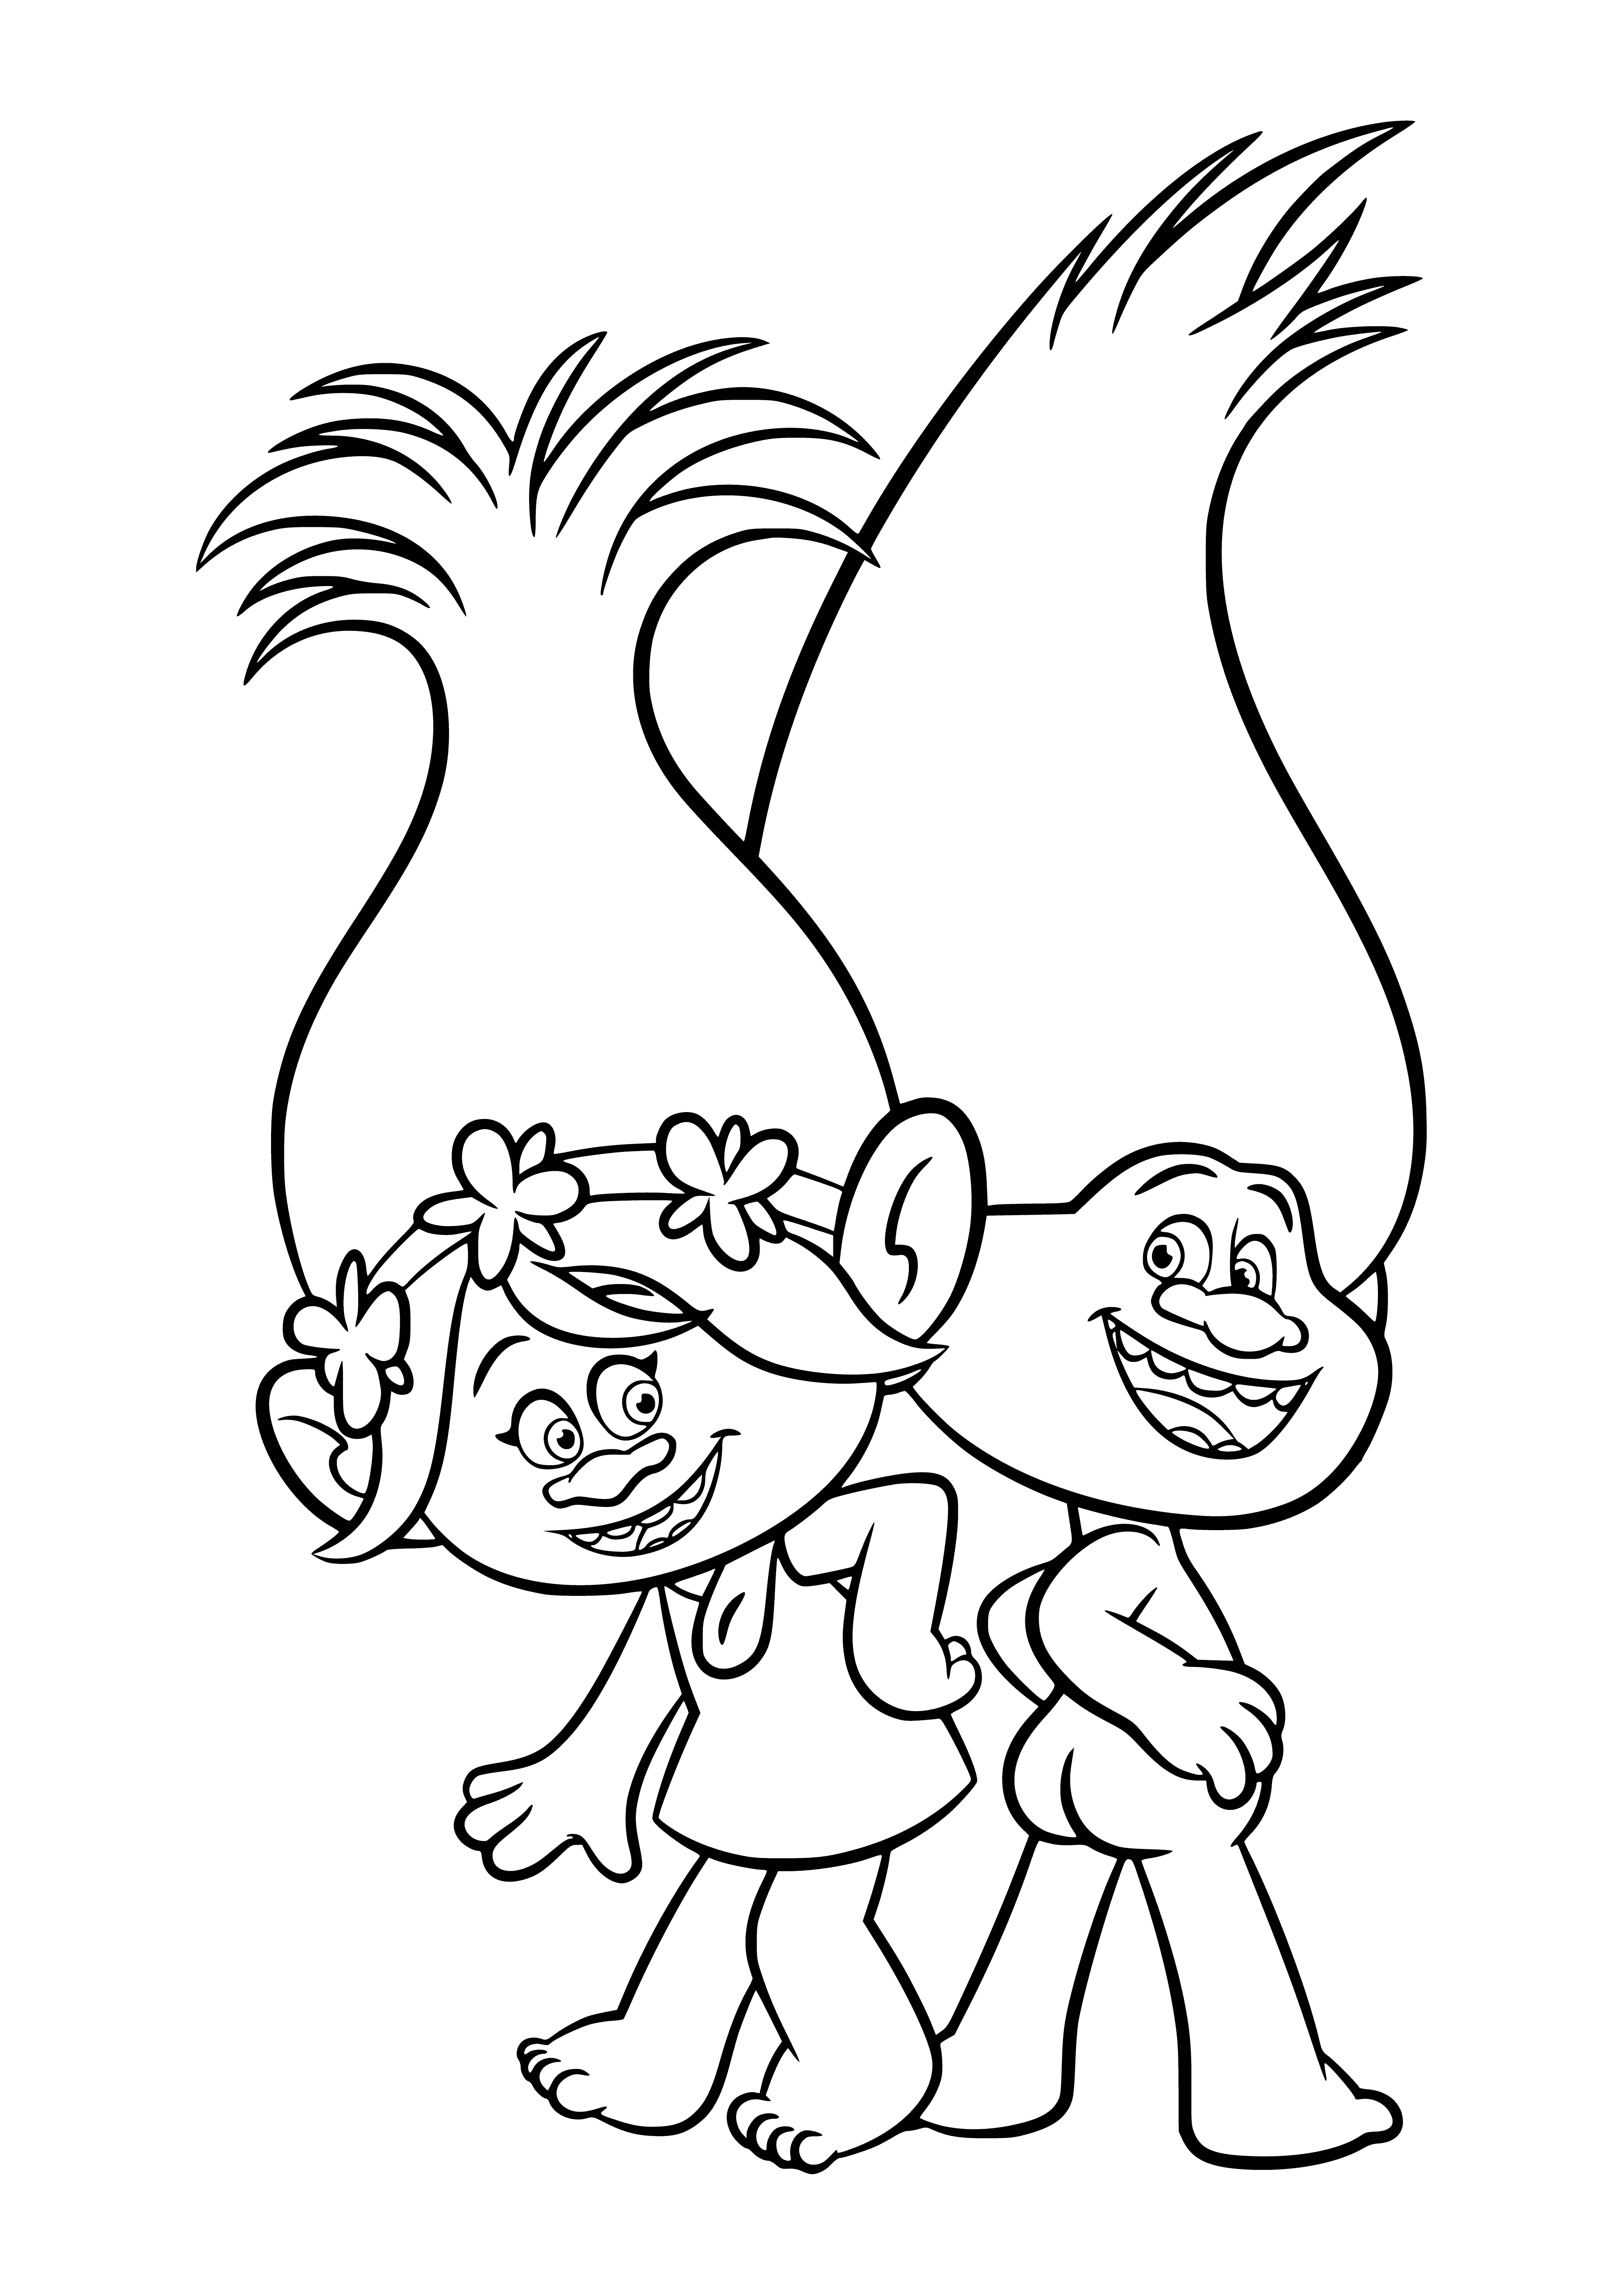 Trolls Rosette and Diamond coloring page